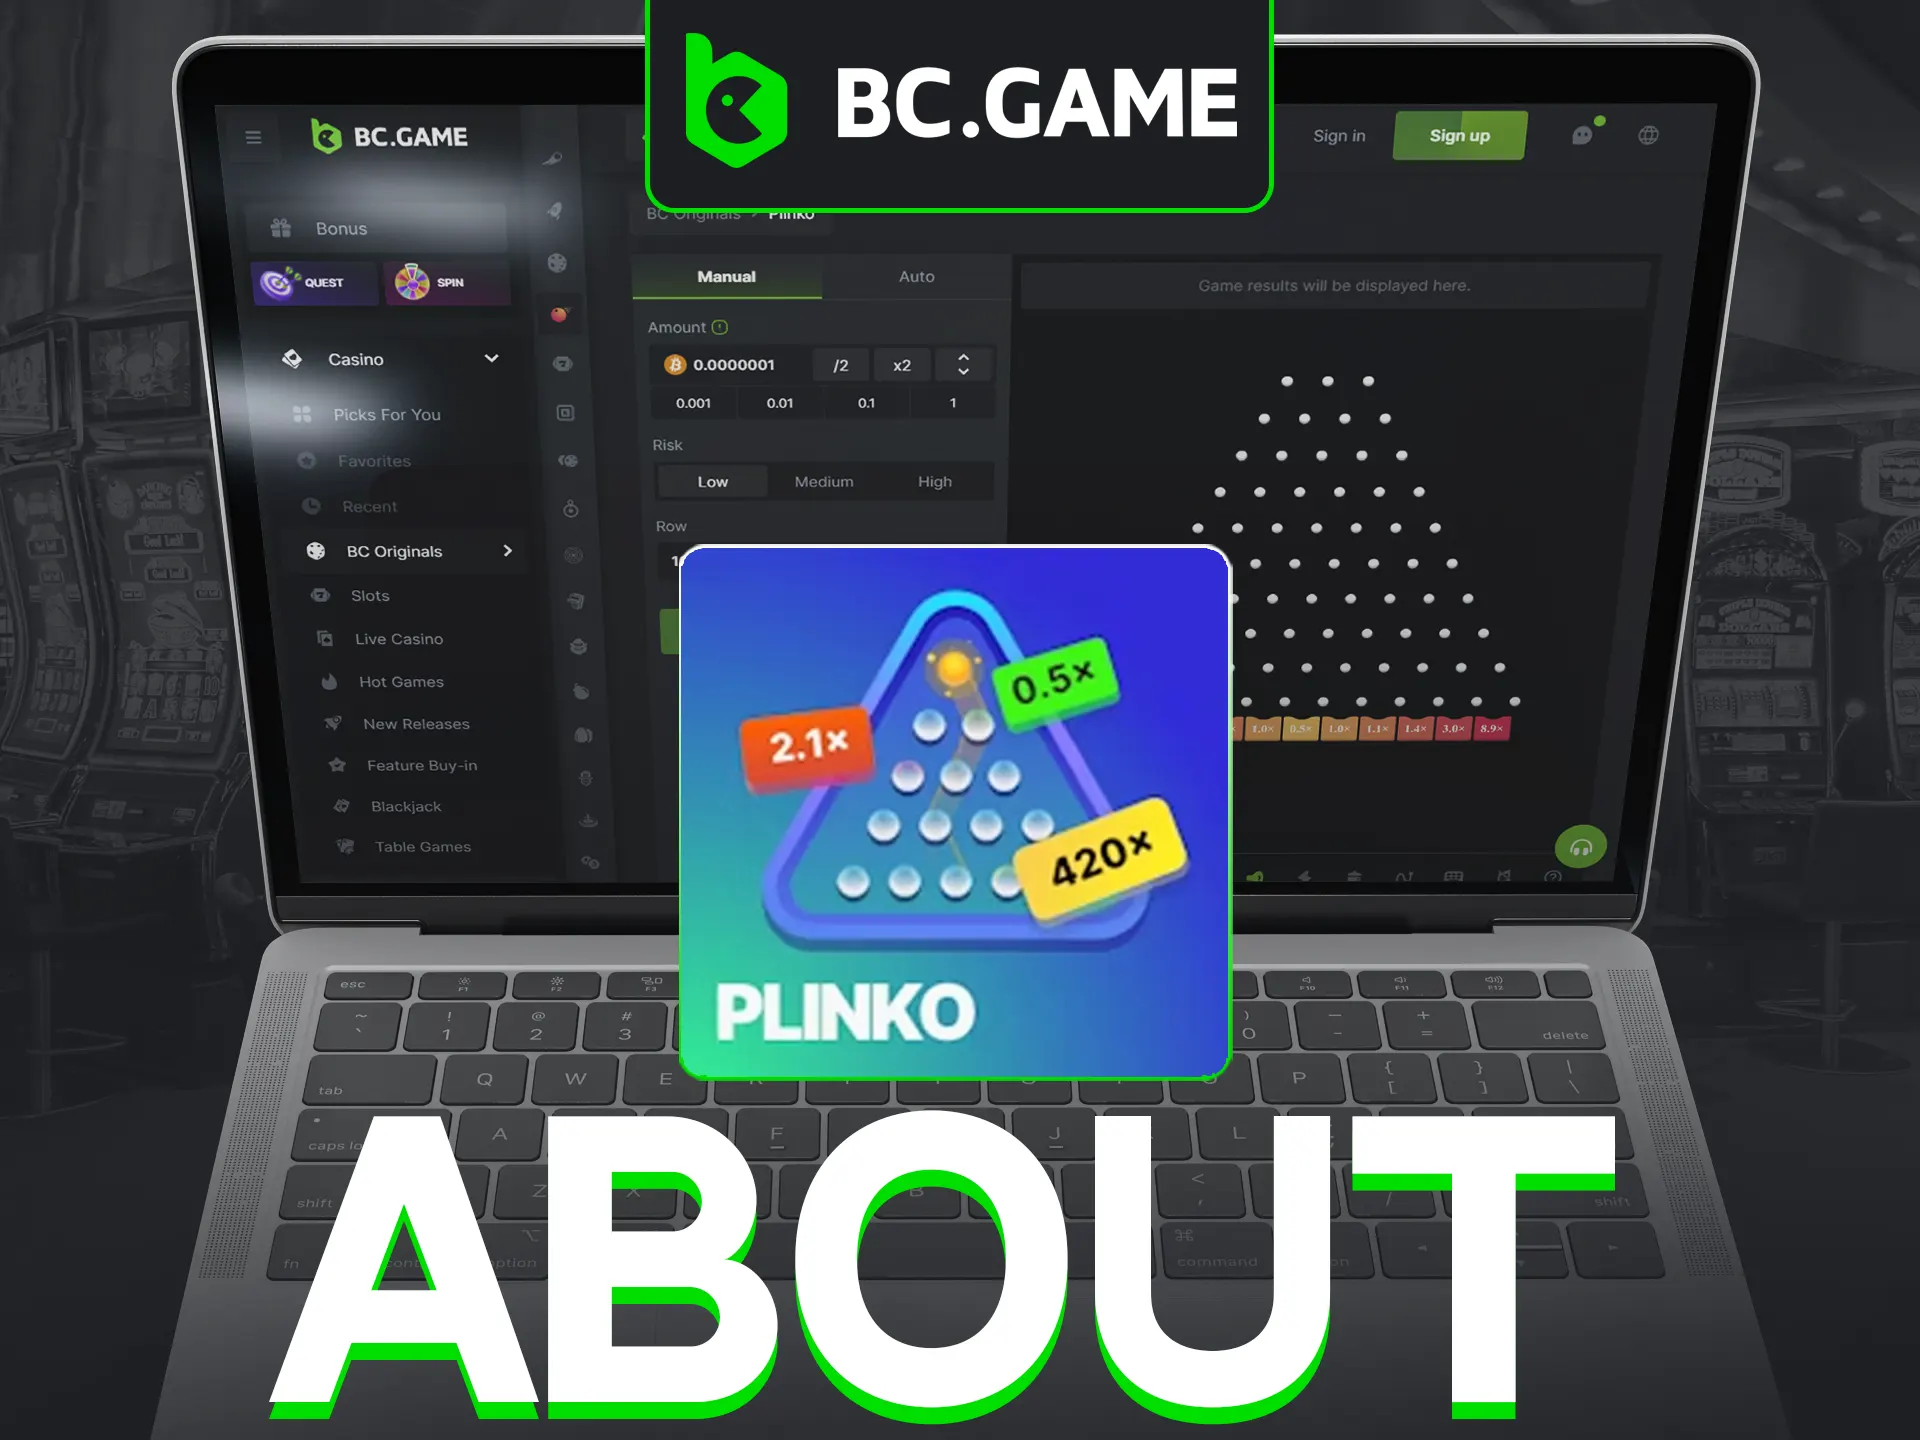 BC Game's Plinko offers customizable gameplay modes.